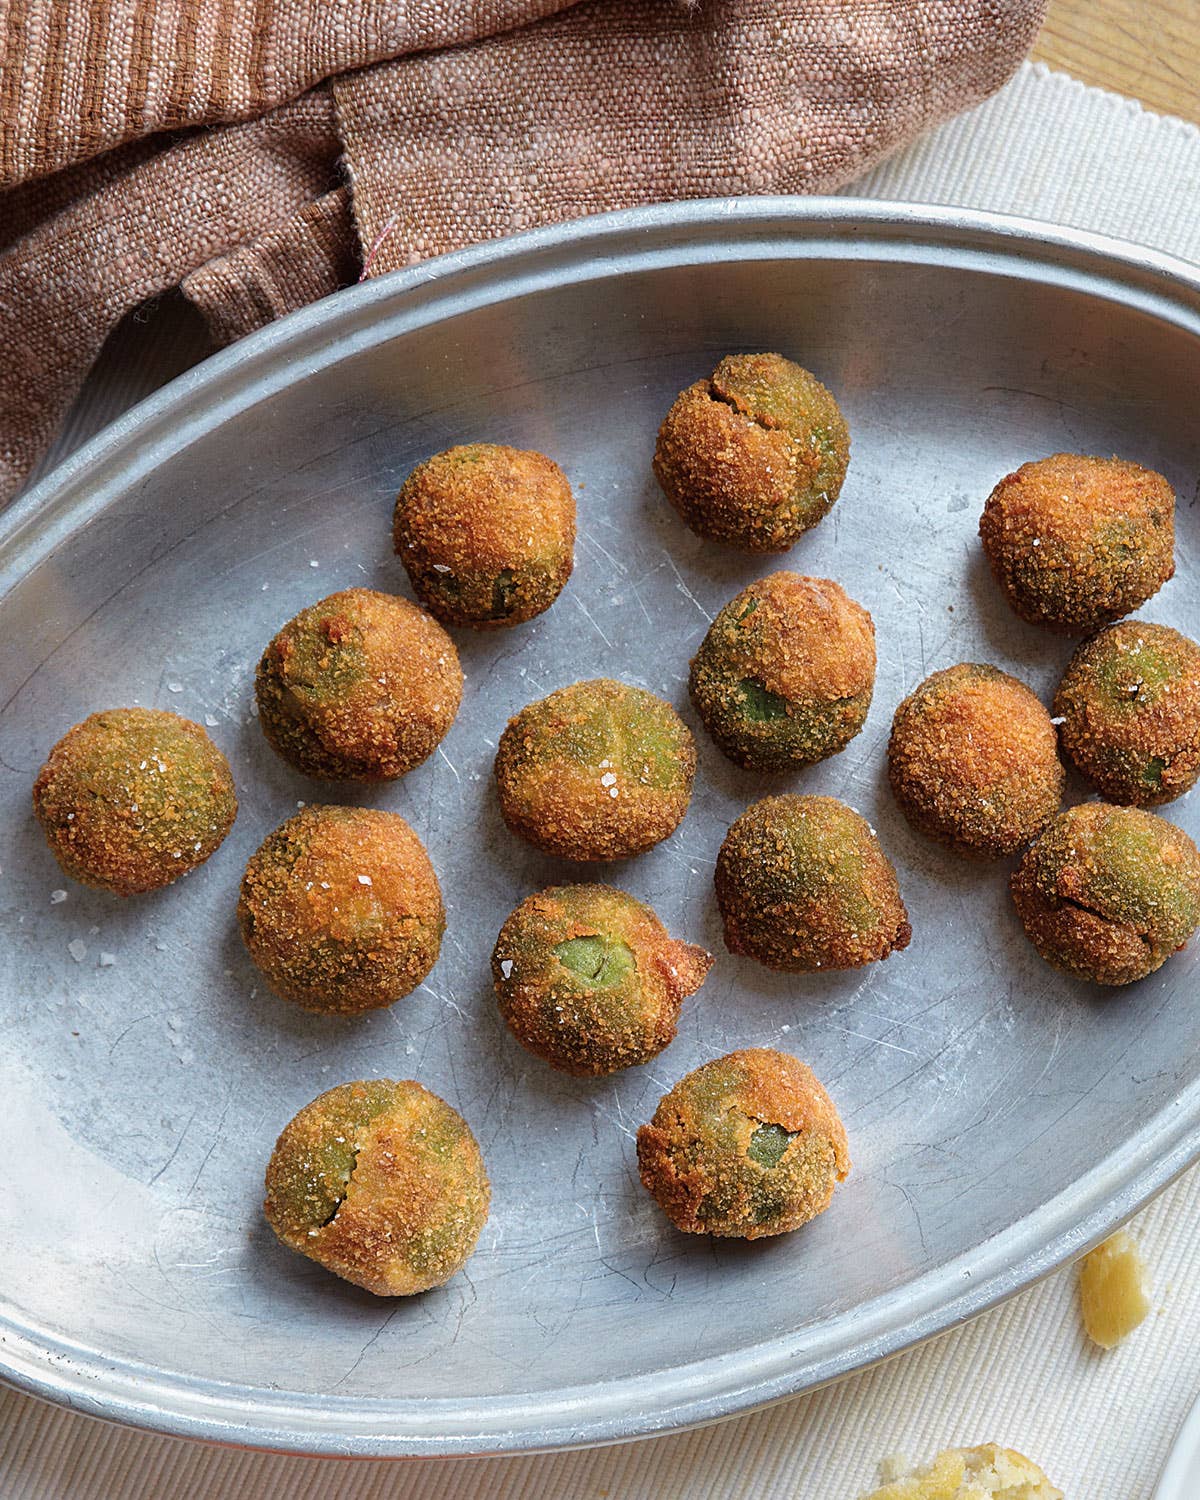 17 Olive Recipes You Probably Haven’t Tried